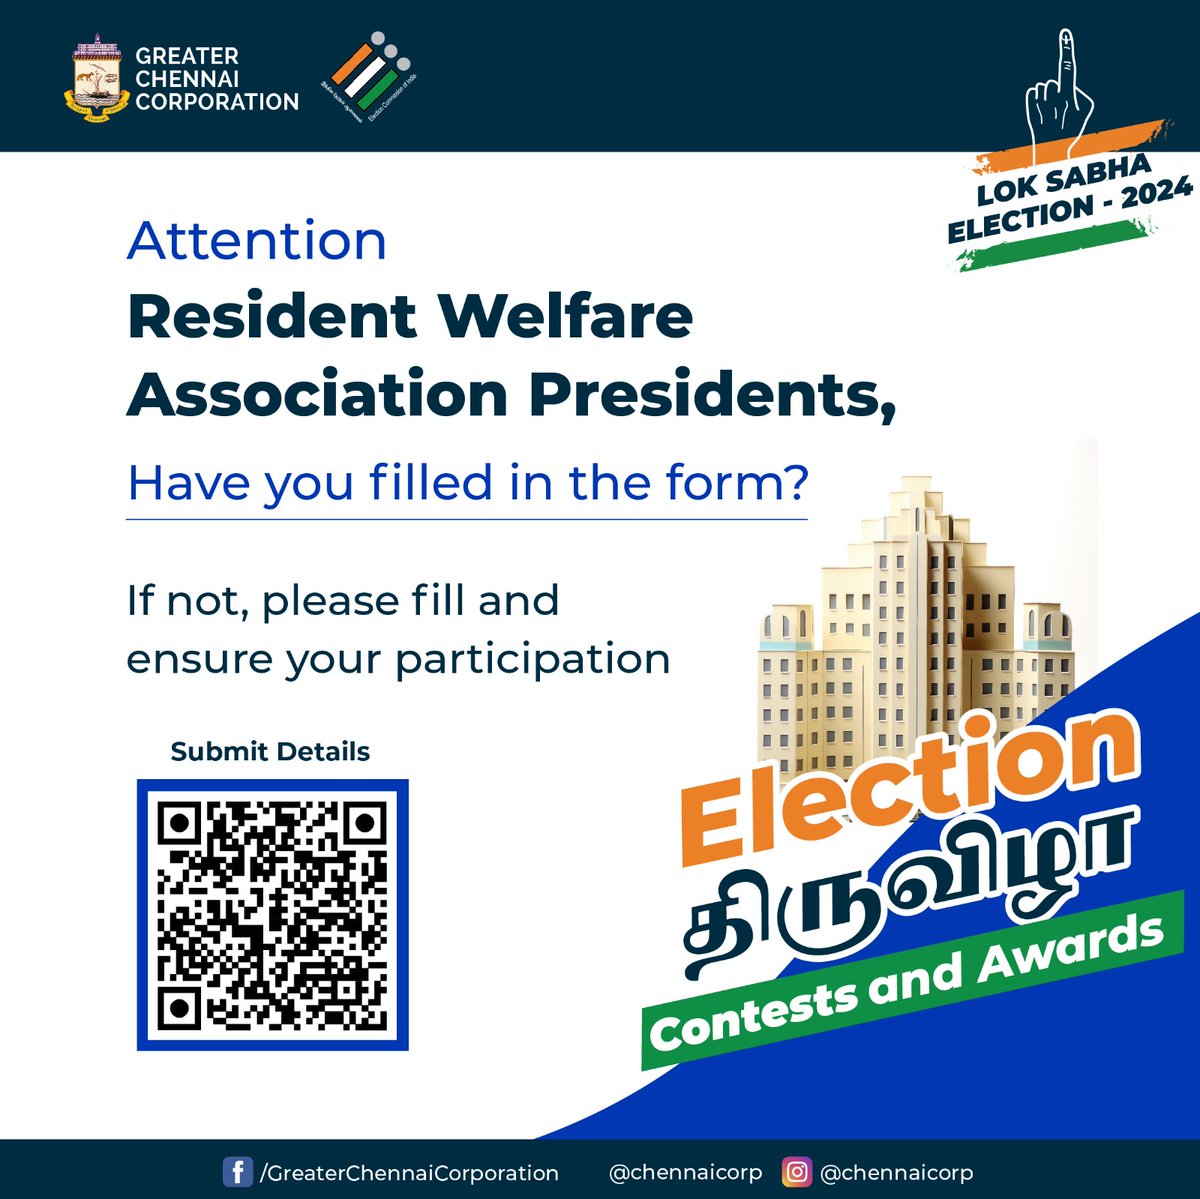 Dear #Chennaiites

Thank you for joining us to motivate fellow Chennaiites to vote.

You can check how many persons have voted in your apartment/ street under your resident welfare association and fill in the form with numbers.
@RAKRI1 
#ChennaiCorporation
#LokSabhaElections2024